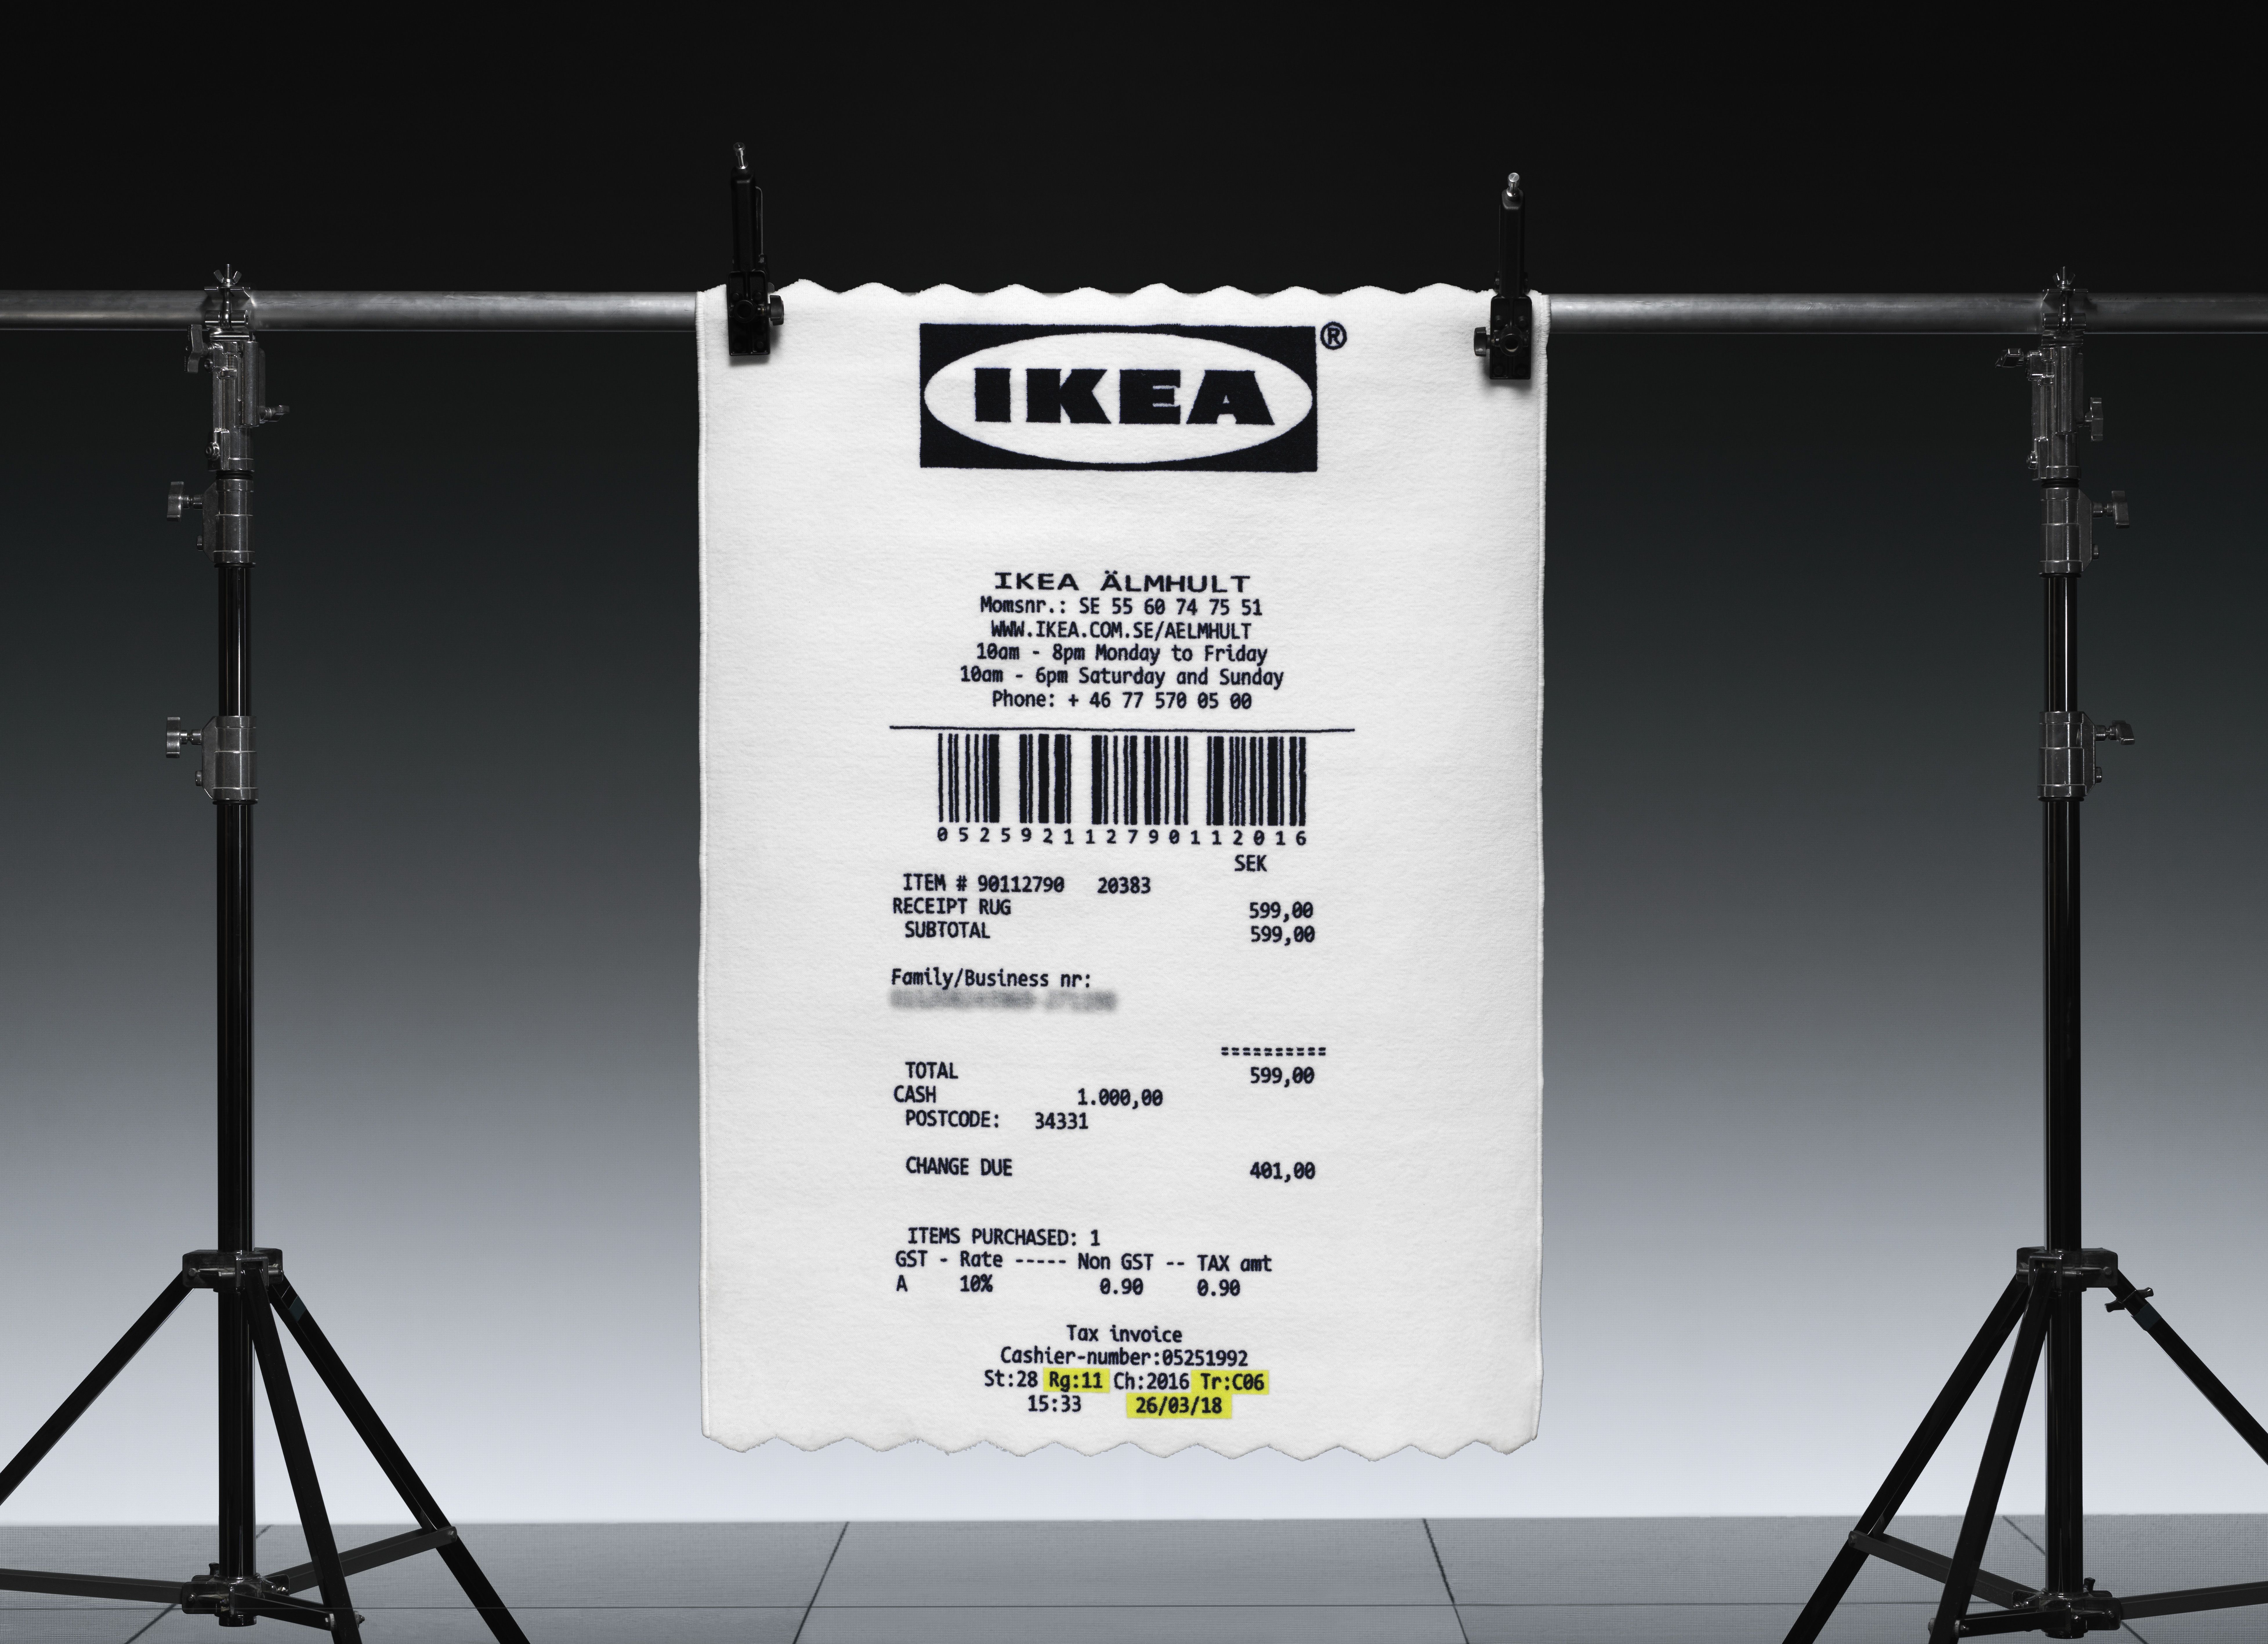 Virgil Abloh launches his limited-edition Ikea collection